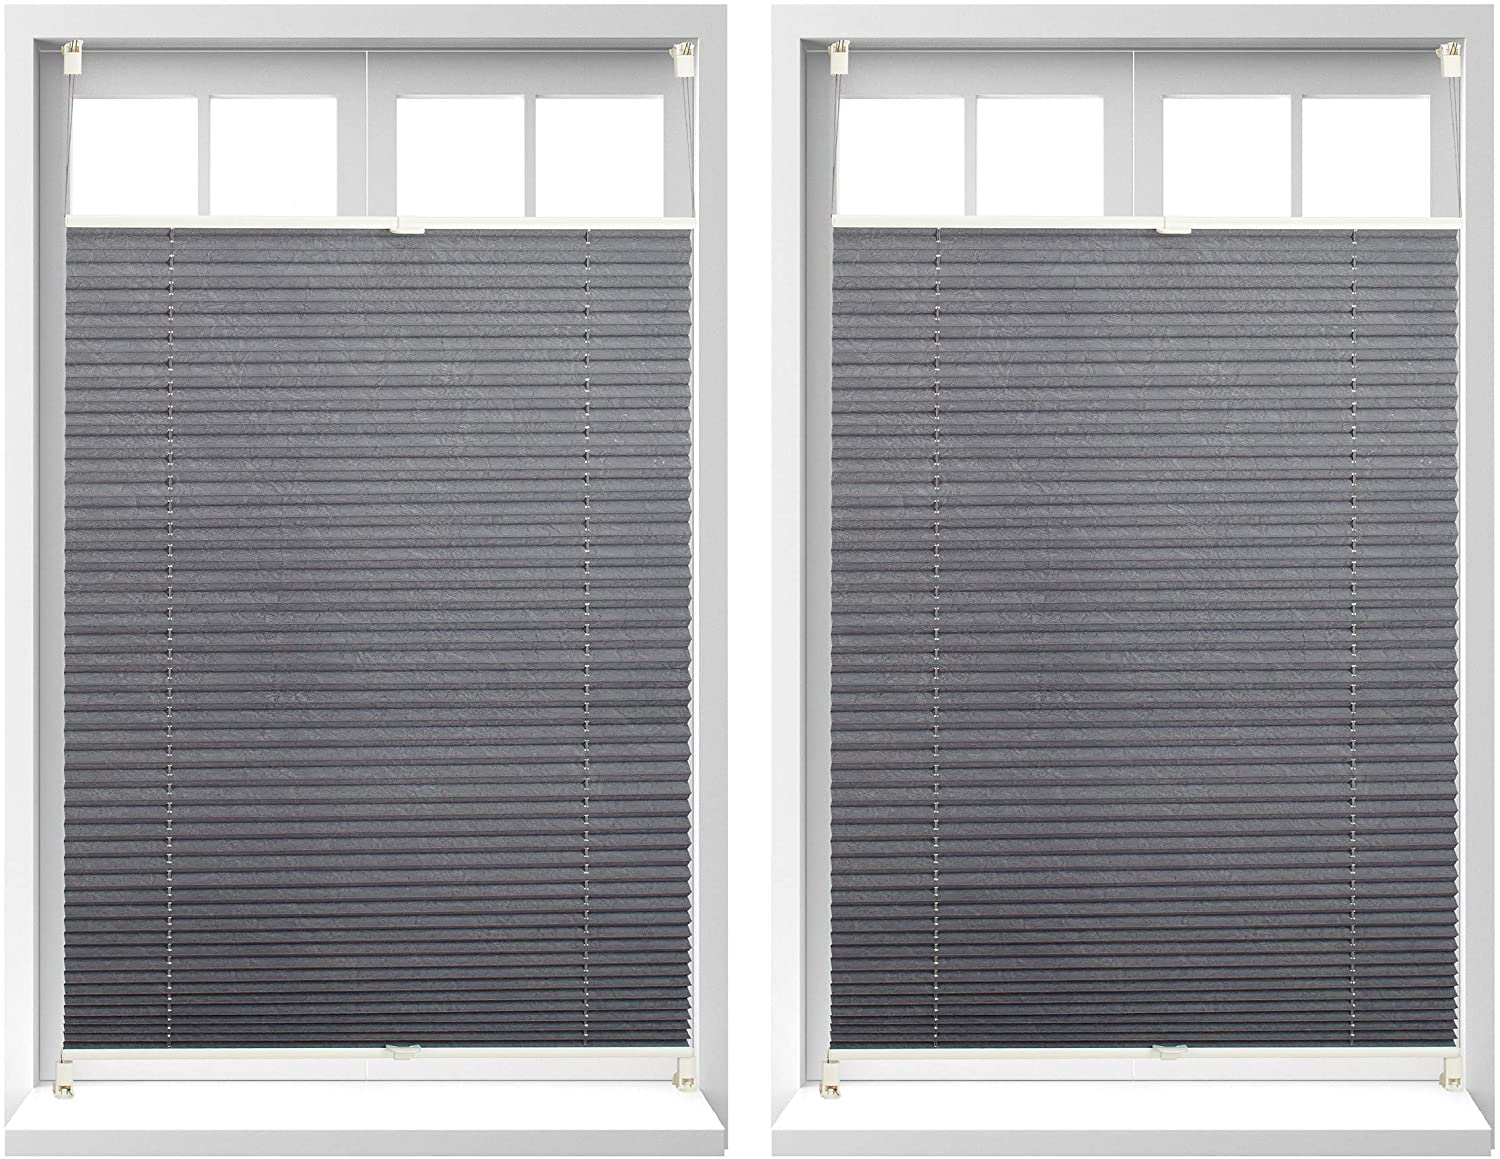 2X Pleated Blind Klemmfix Without Drilling, Translucent Blind Blind Grey Fo